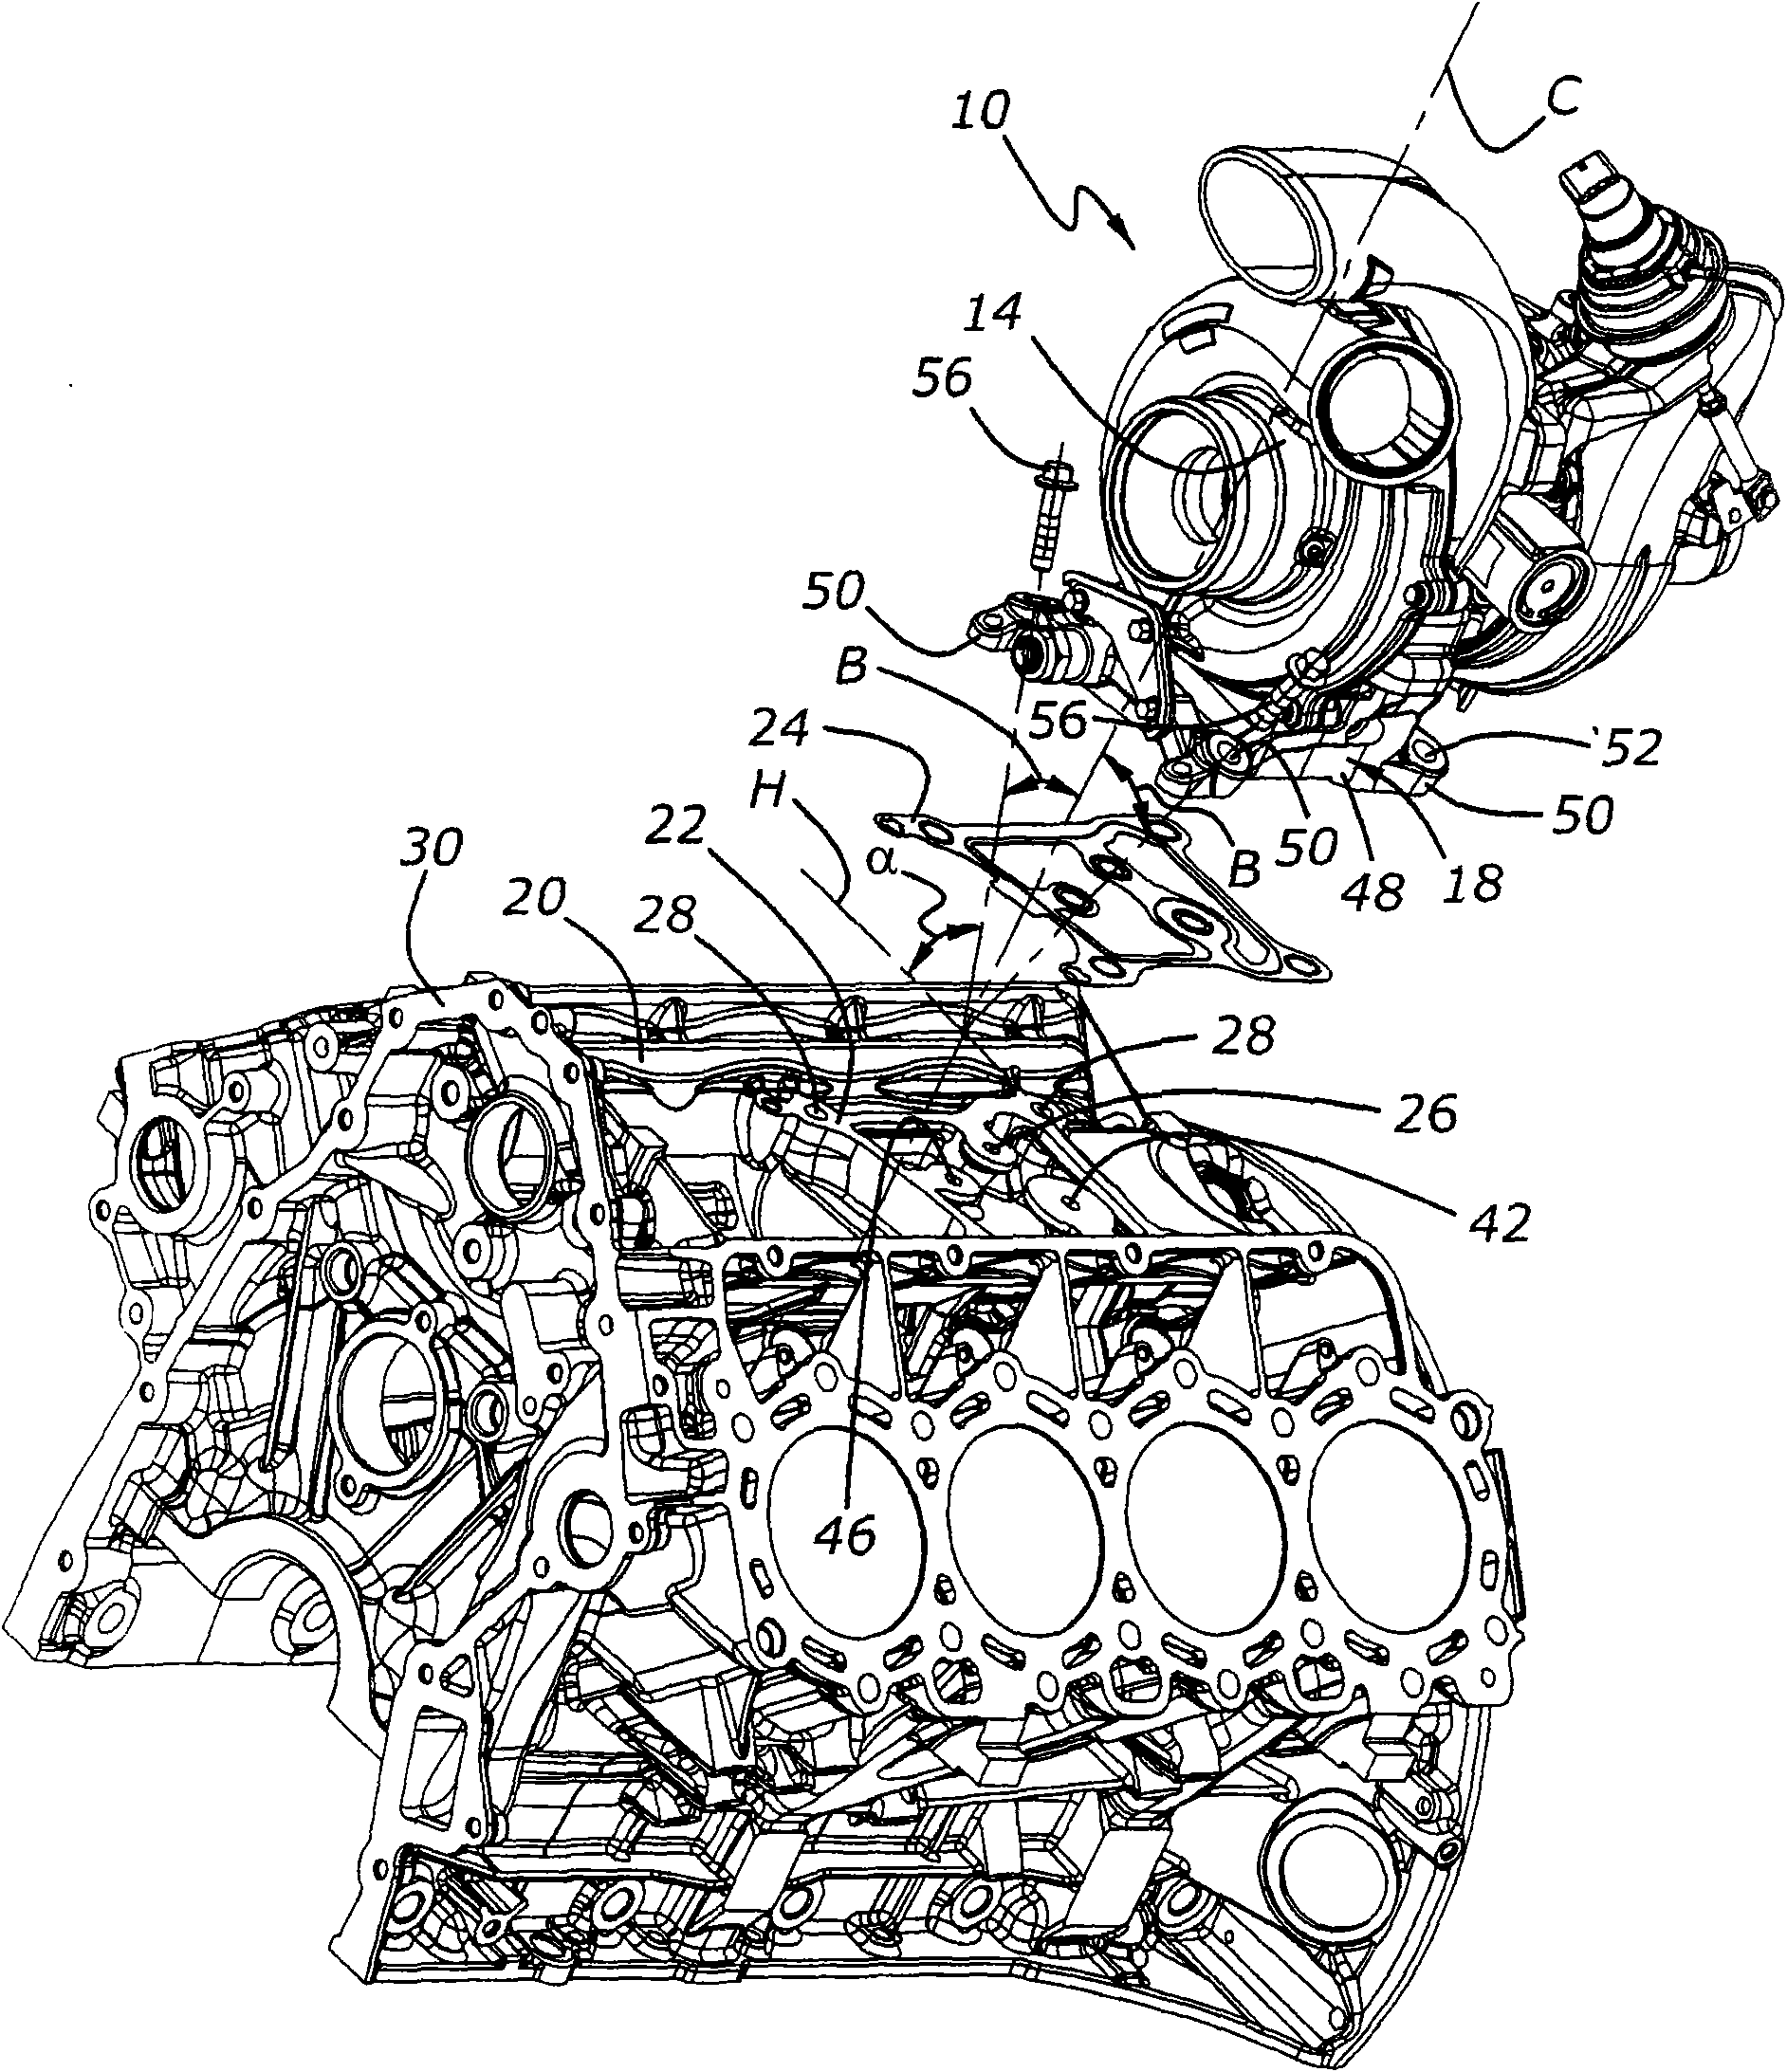 Turbocharger system with internally isolated turbocharger oil drainback passage